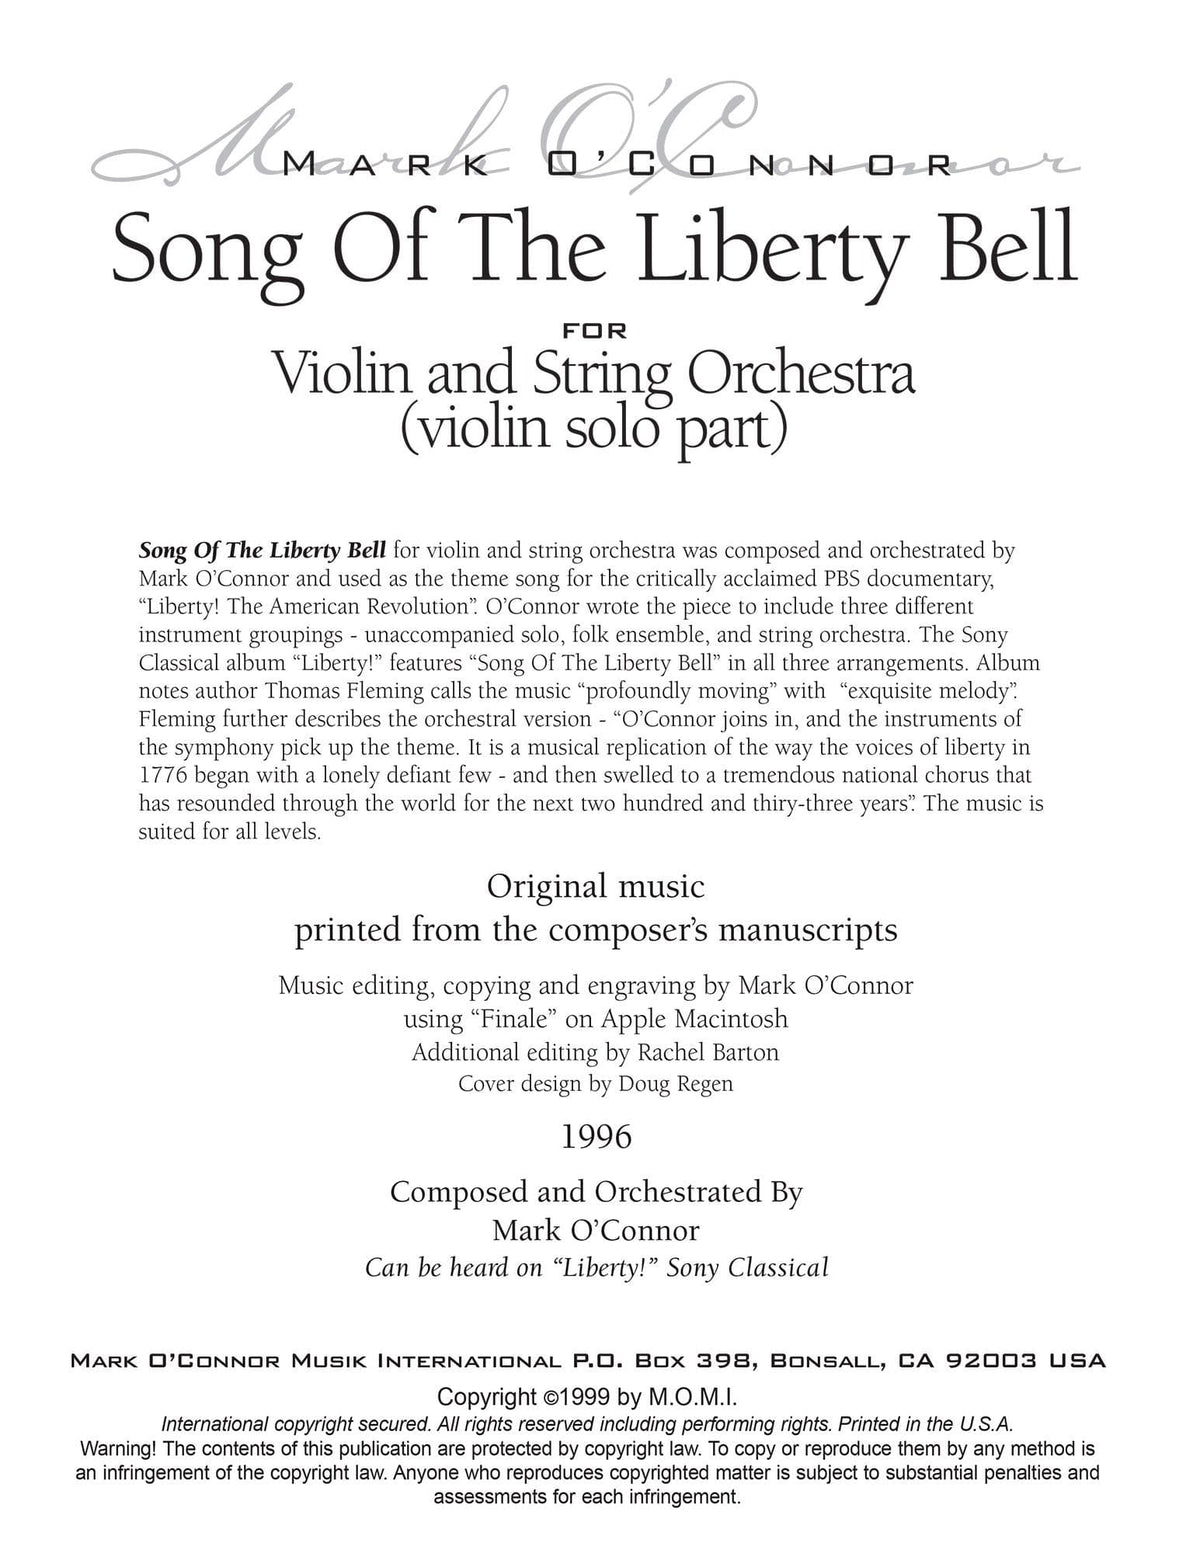 O'Connor, Mark - Song Of The Liberty Bell for Violin and String Orchestra - Solo Violin - Digital Download